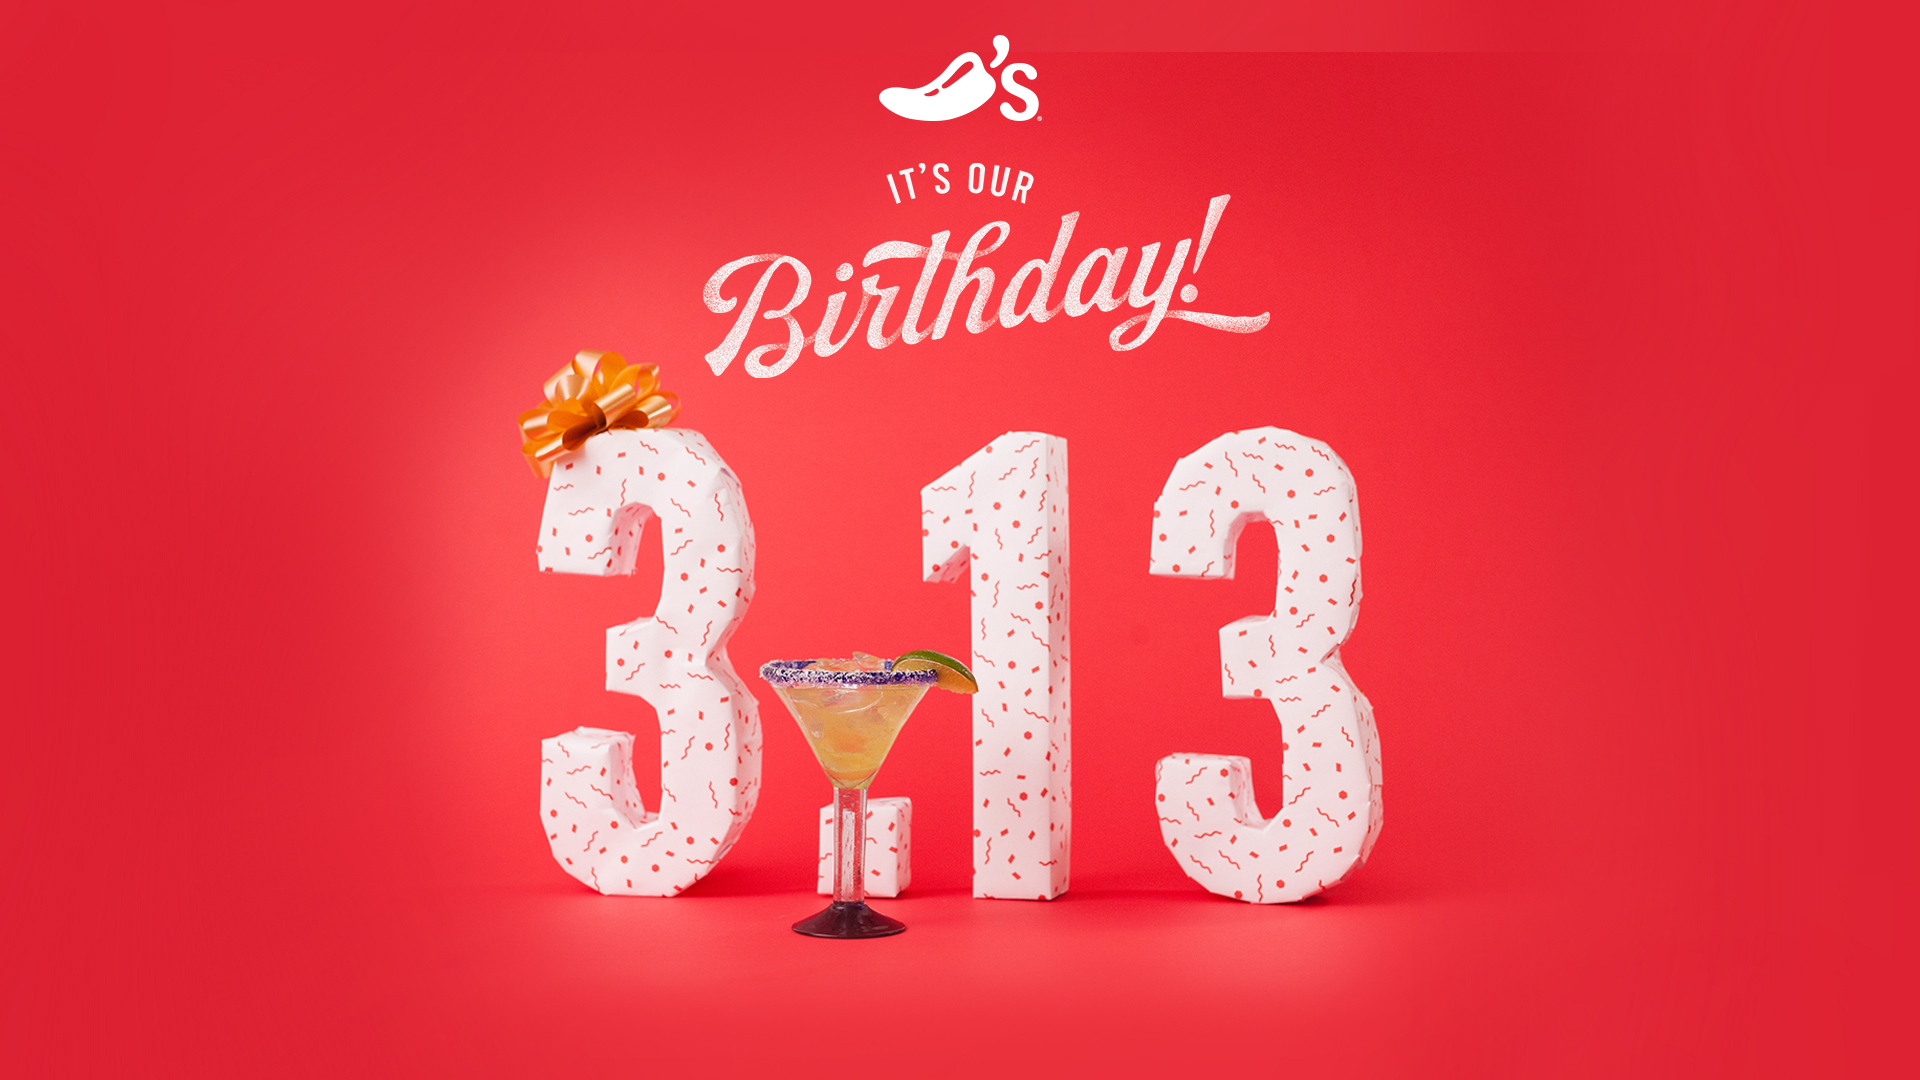 Today only: Enjoy $3.13 margaritas at Chili’s!